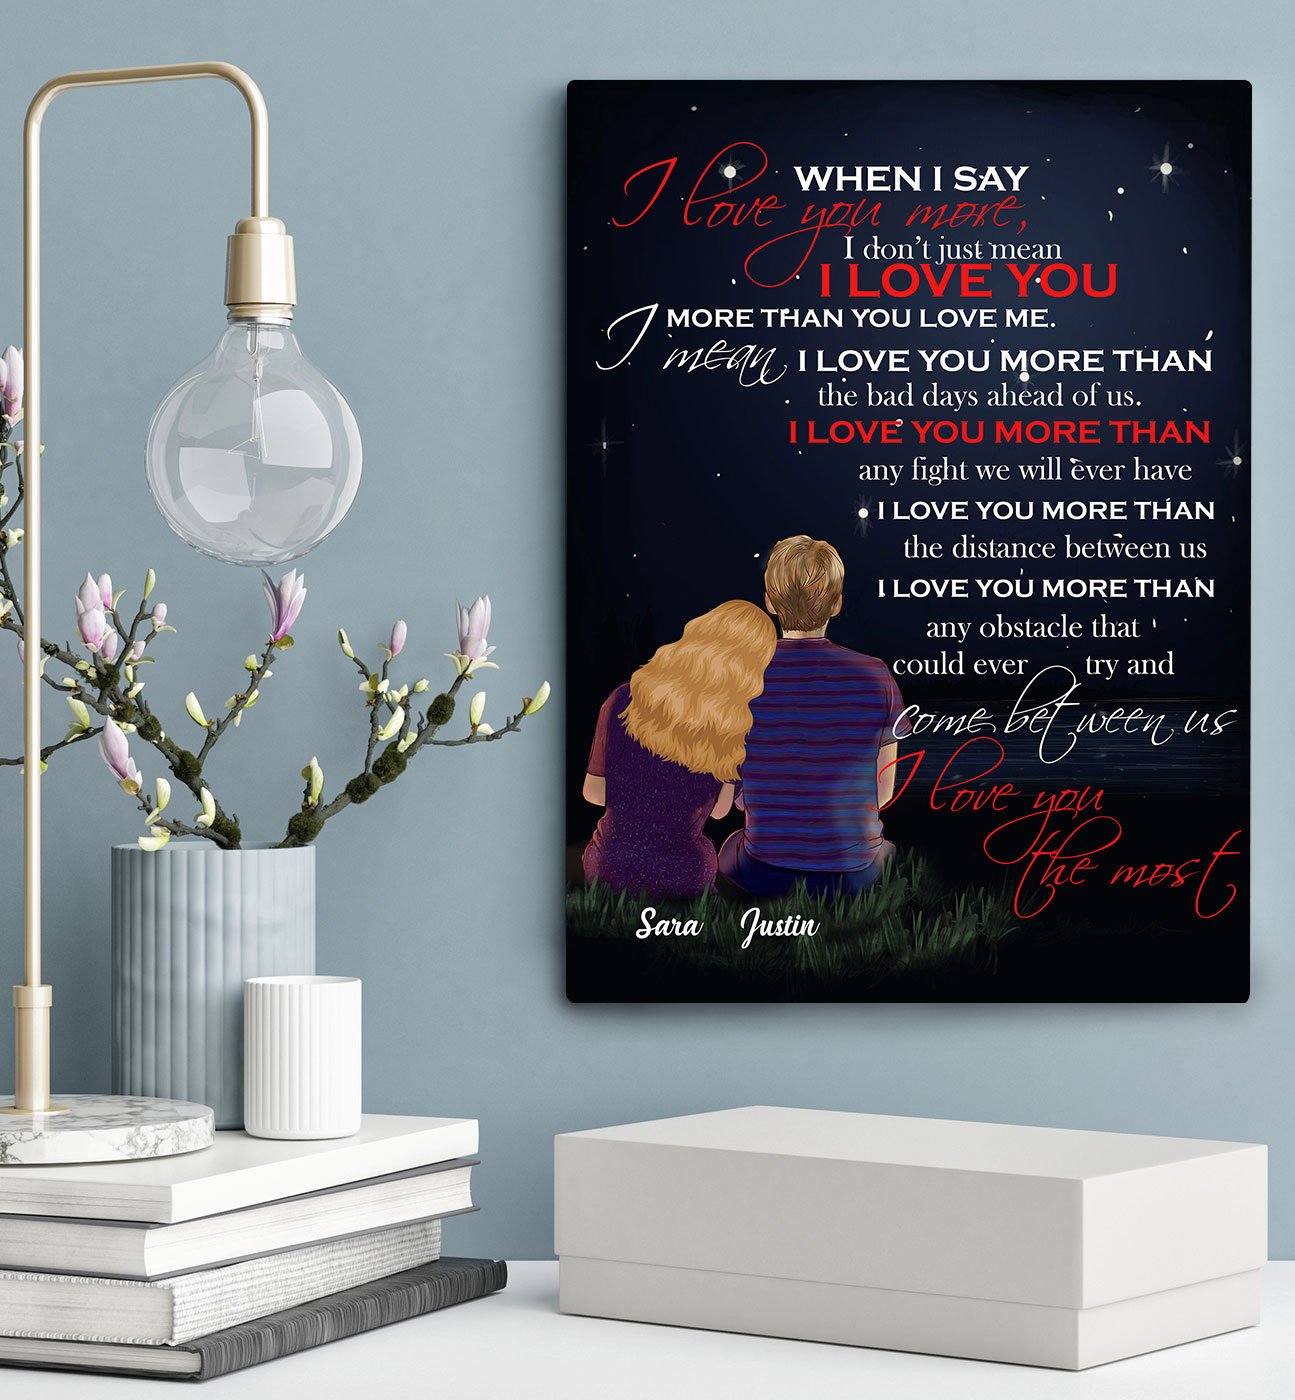 Custom Personalized photo name canvas prints painting wall art Valentine gift idea for him boyfriend husband her girlfriend wife couple - I love You More TY1412